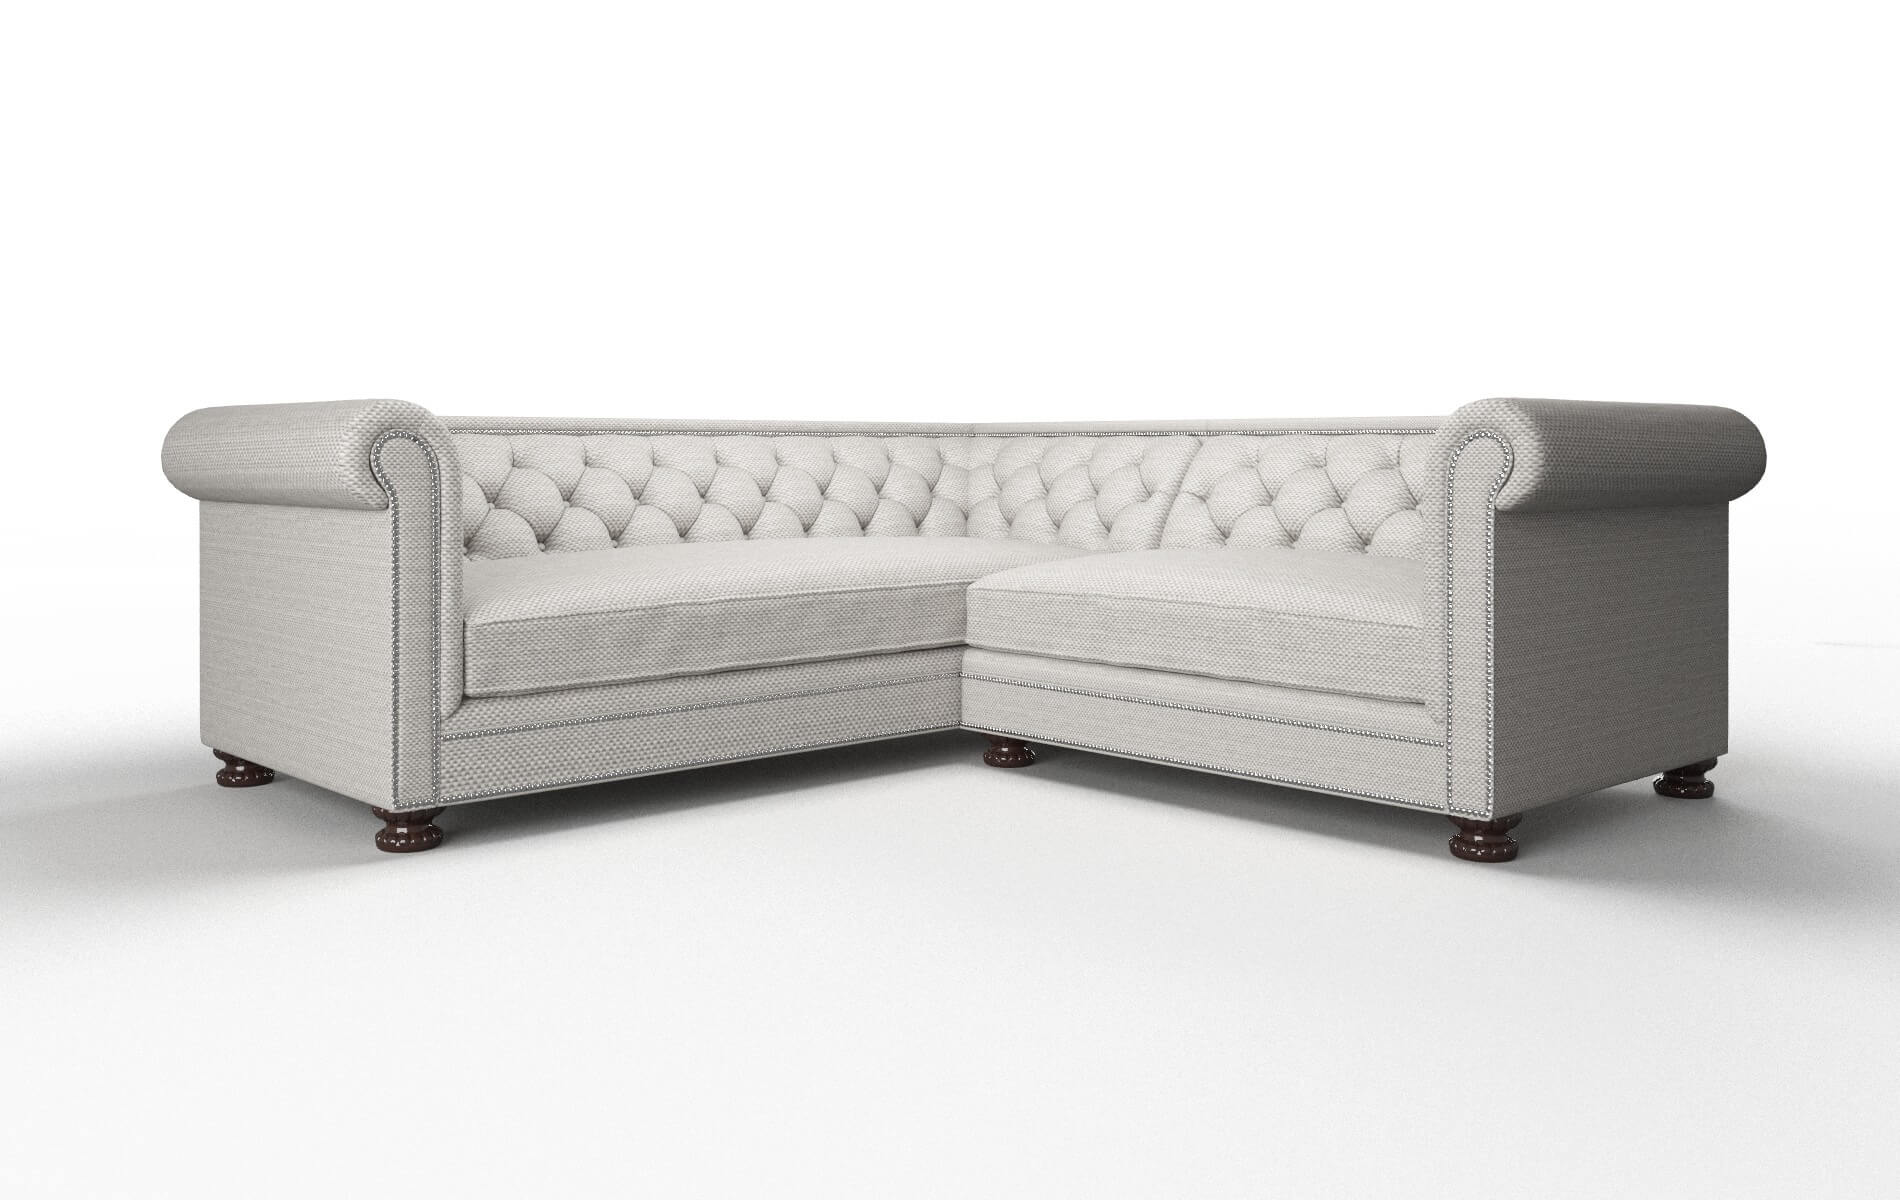 Athens Avenger Dolphin Sectional espresso legs